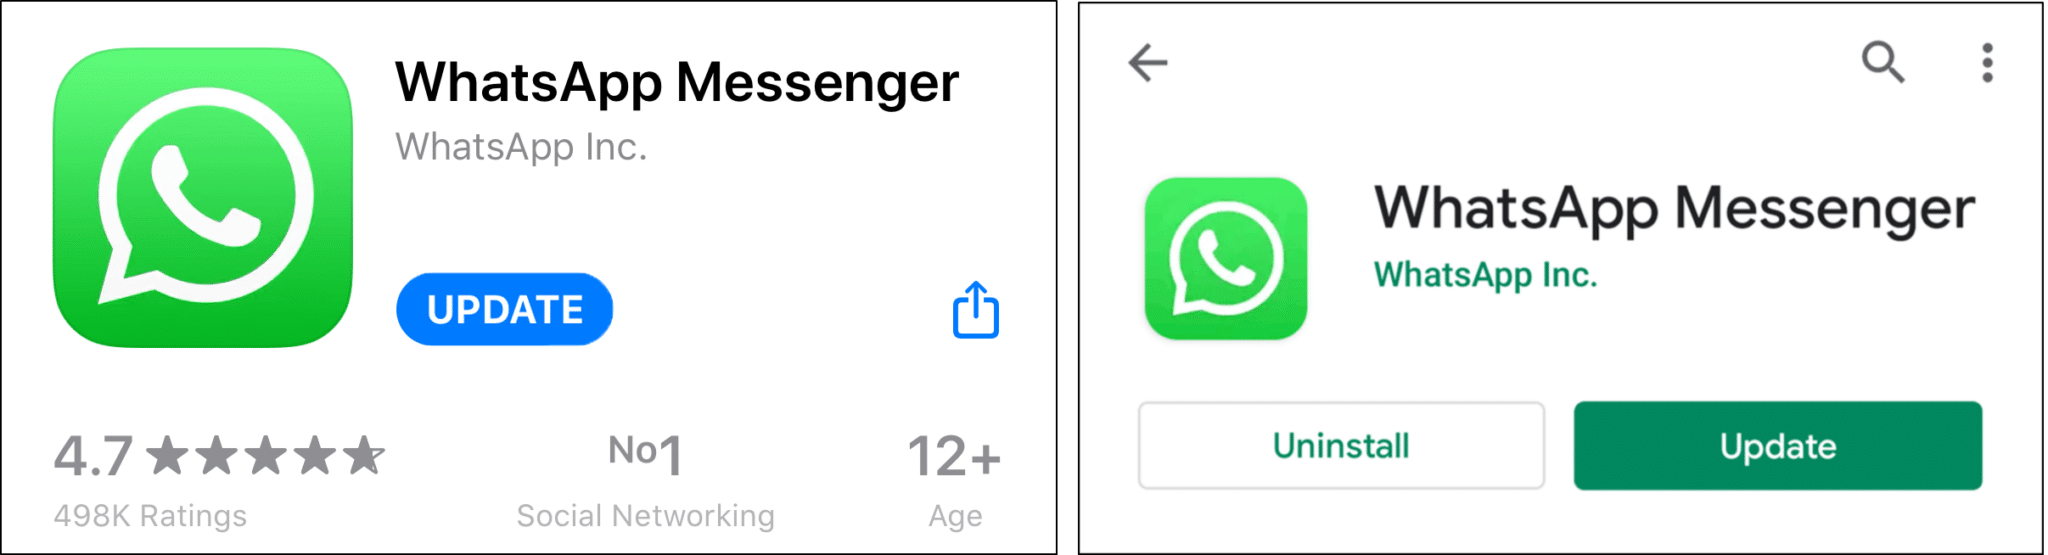 Update Whatsapp to fix status not uploading and "Couldn't send" error